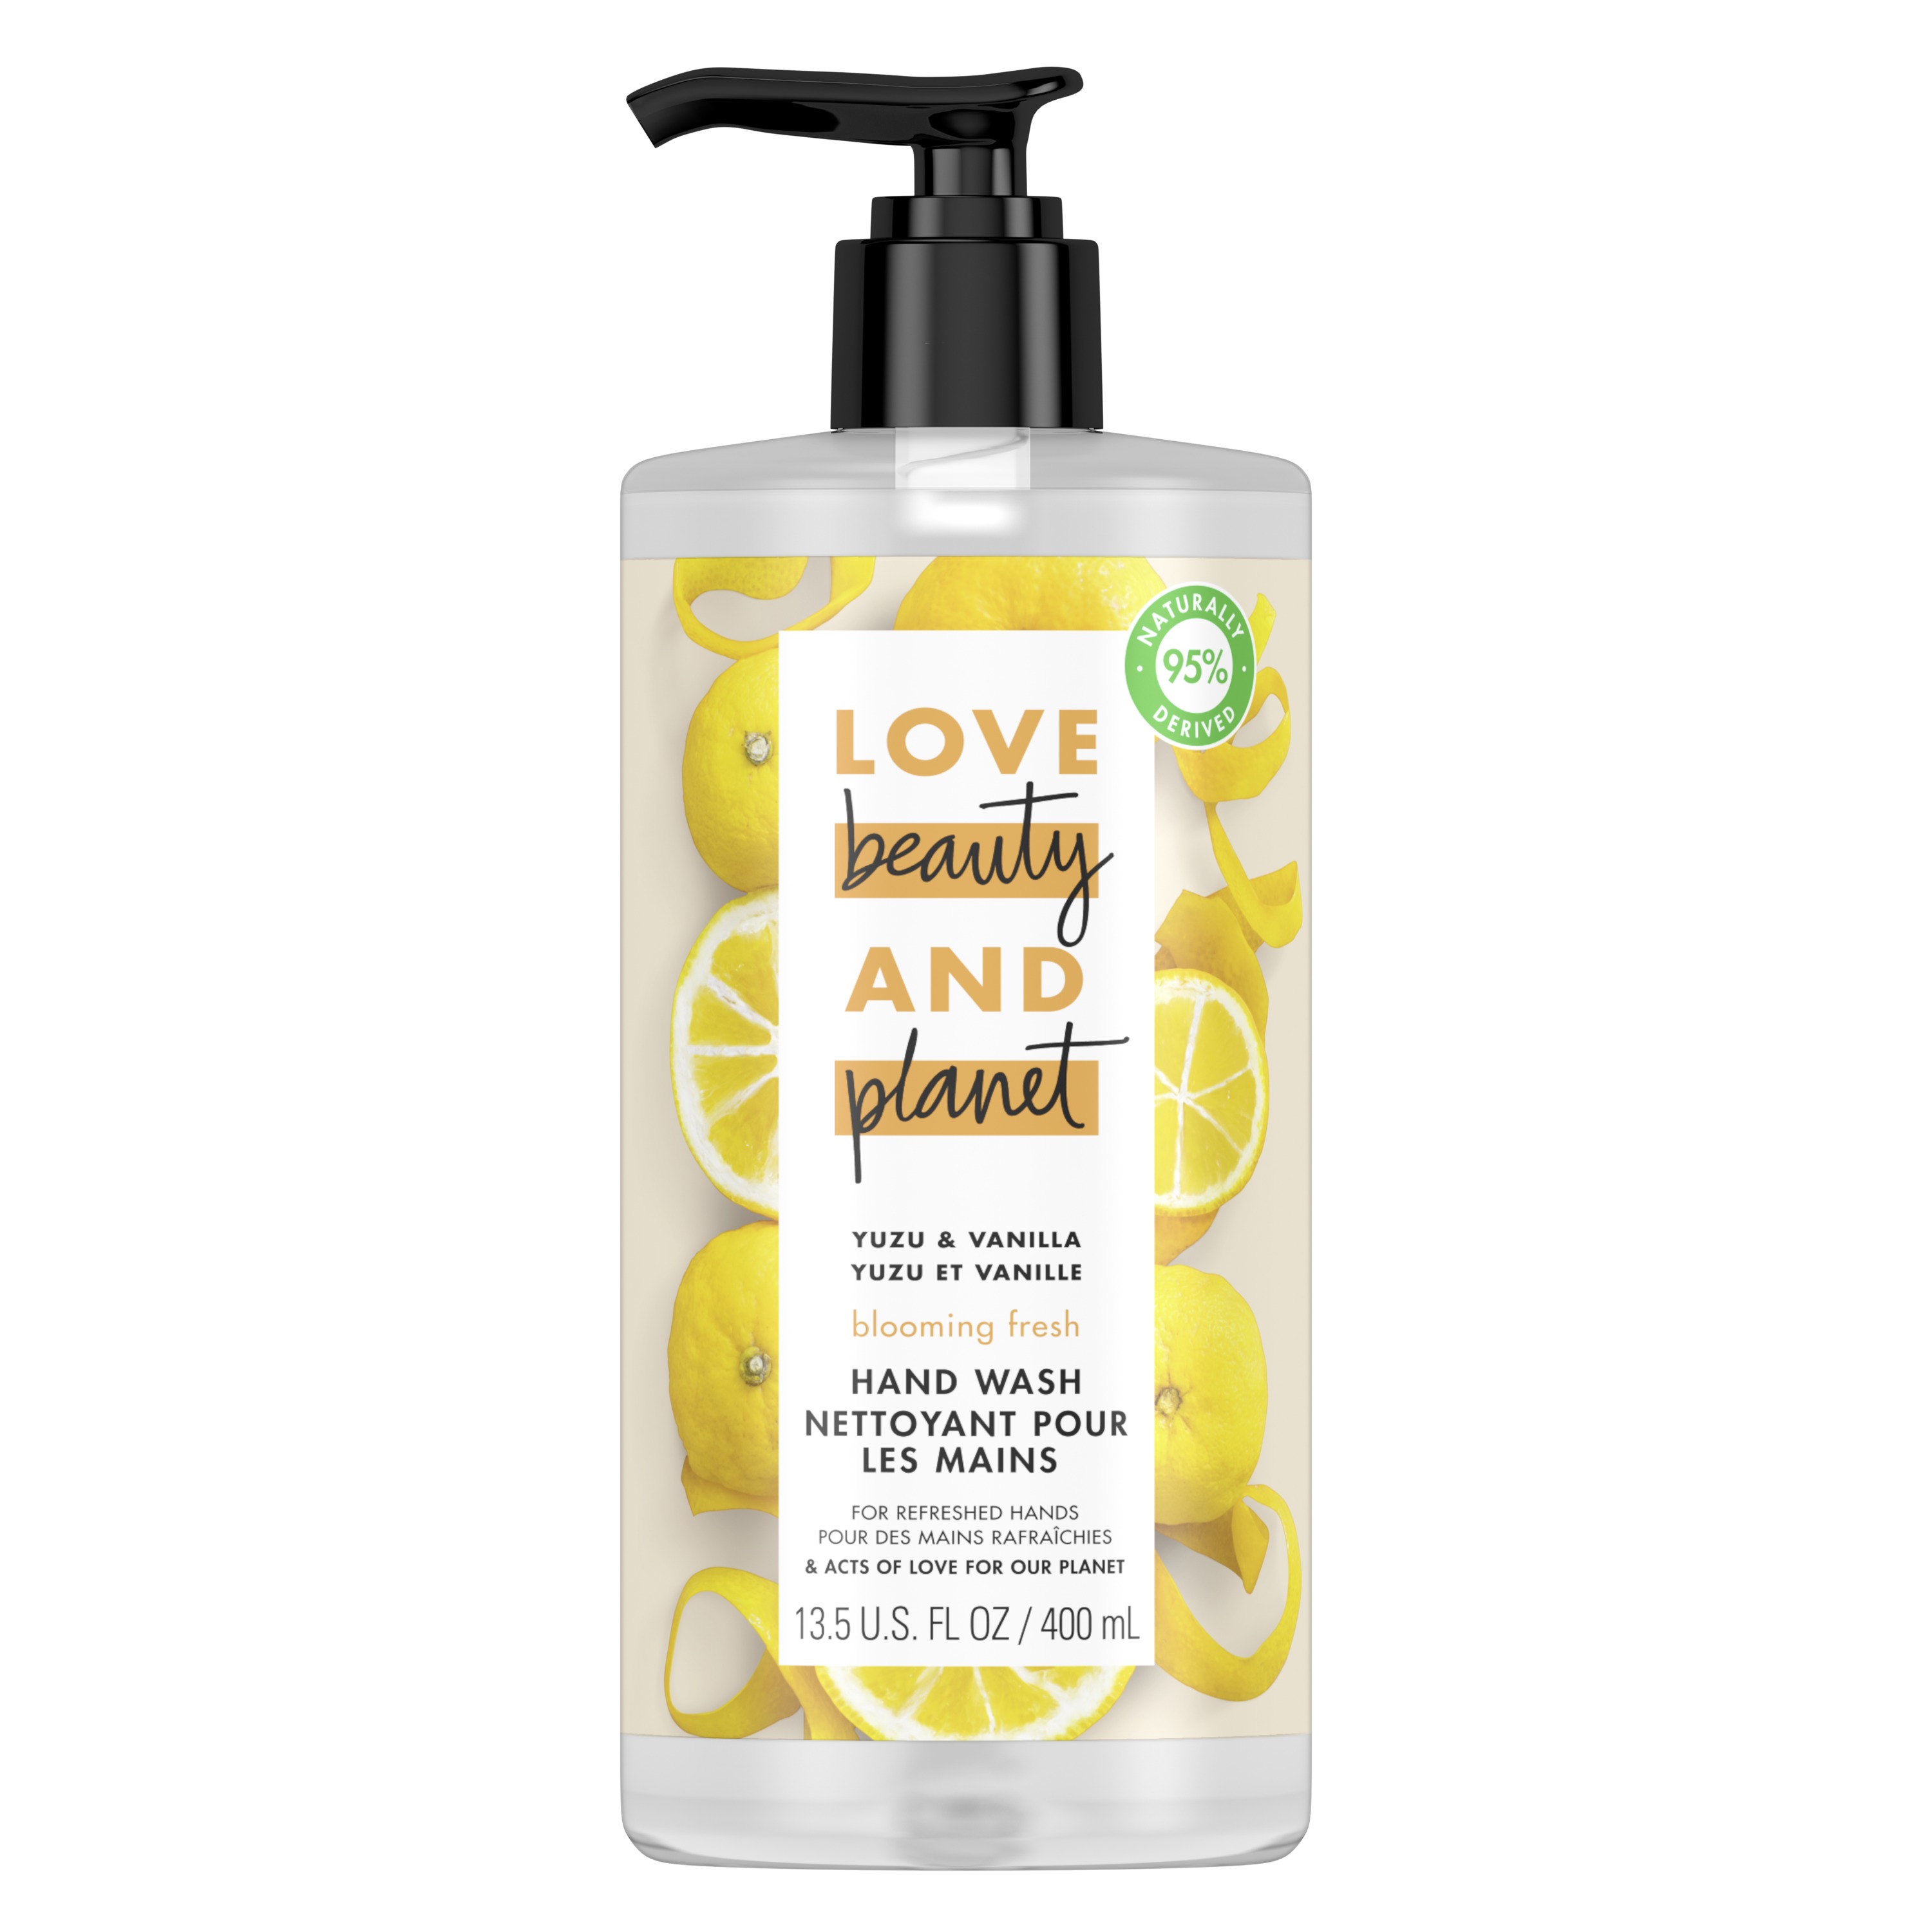 Love Beauty And Planet Blooming Fresh Hand Soap Yuzu & Vanilla 13.5 oz - image 1 of 8